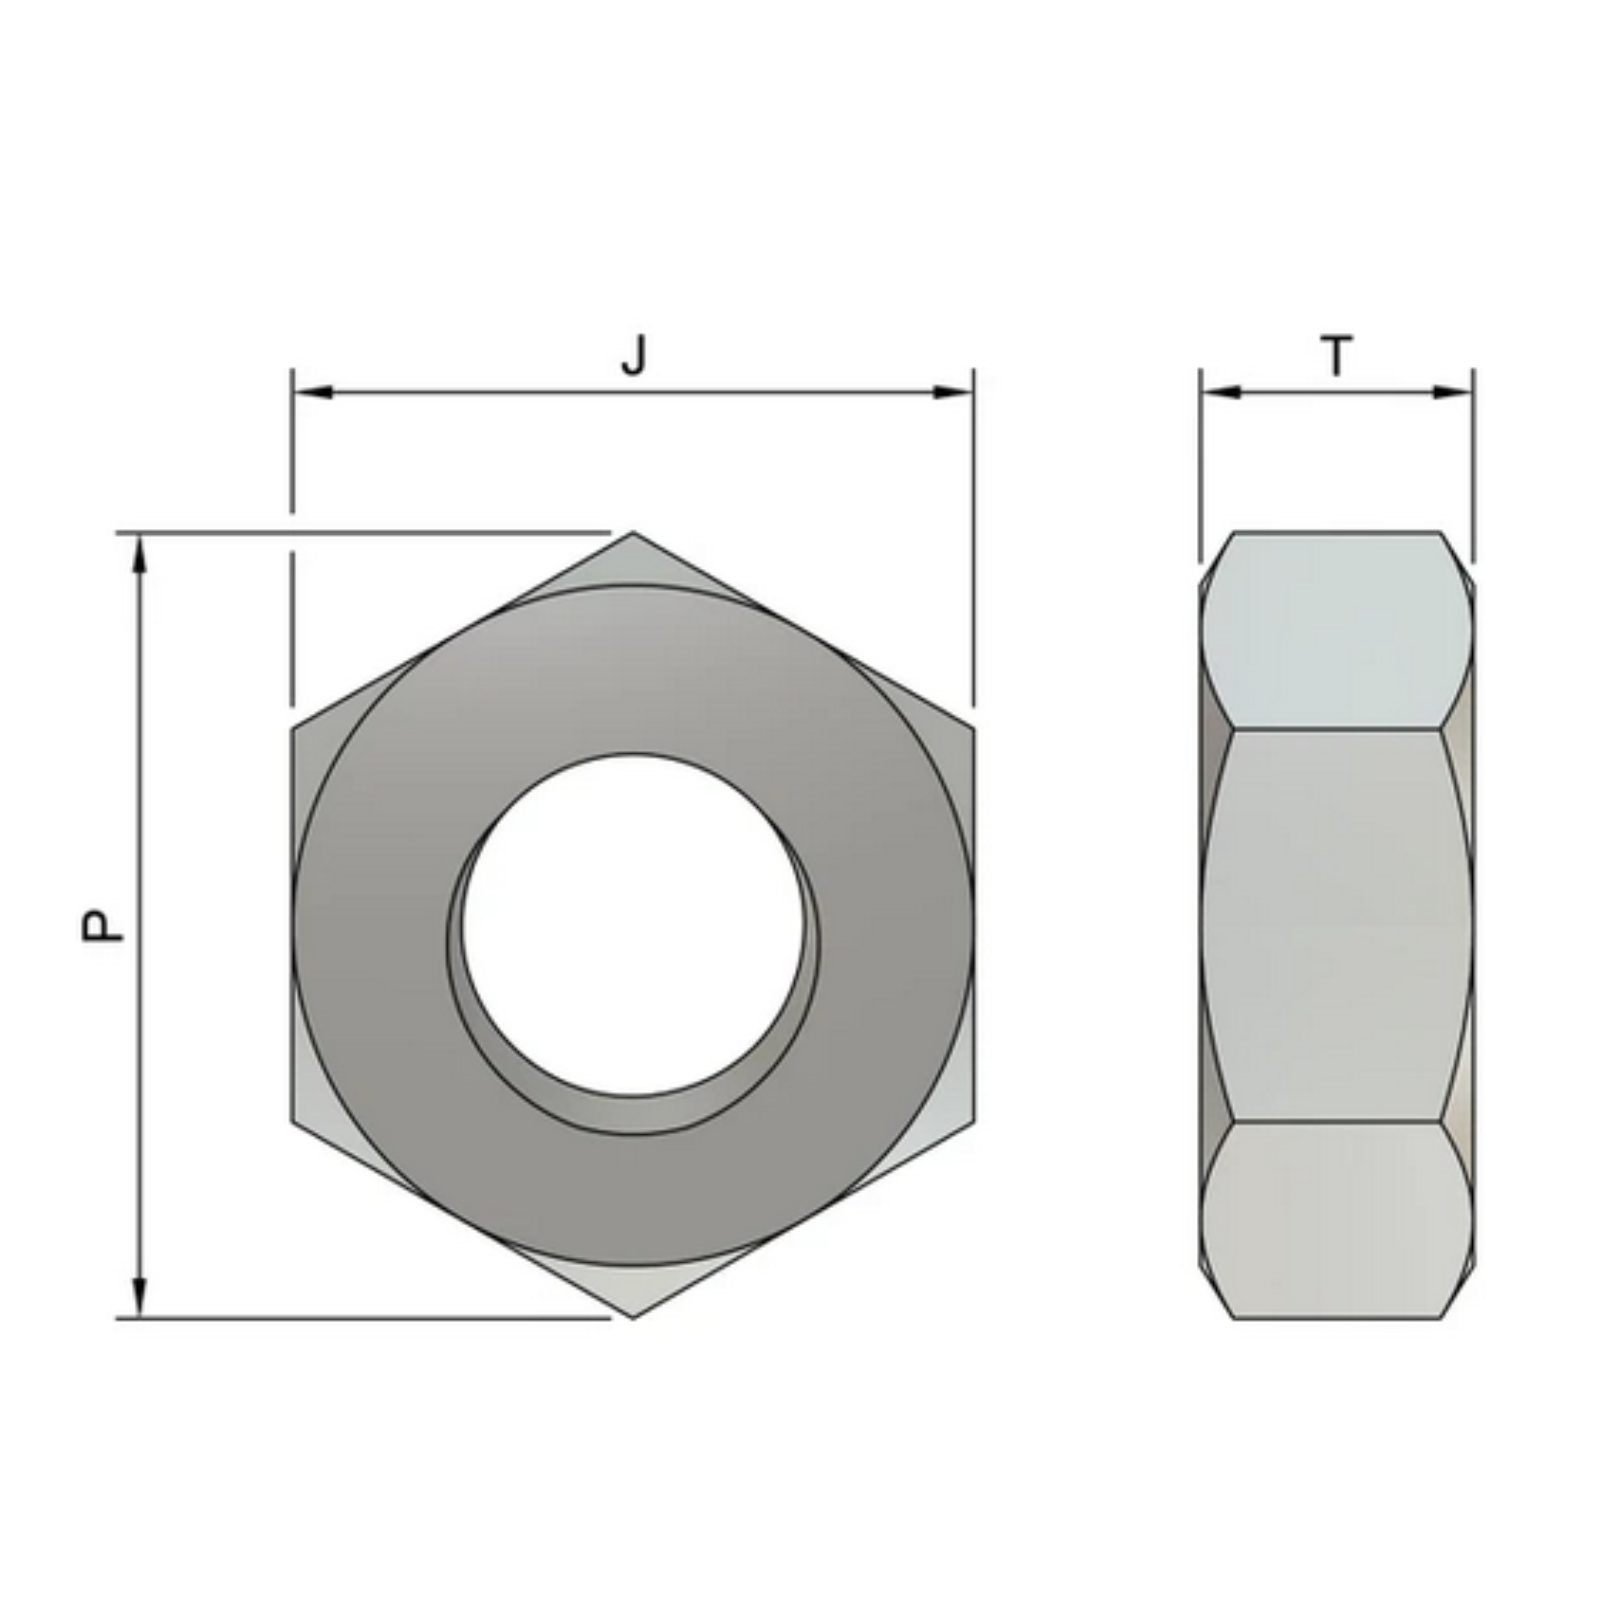 M6 Hexagon Nuts (DIN 934) - Stainless Steel (A4)